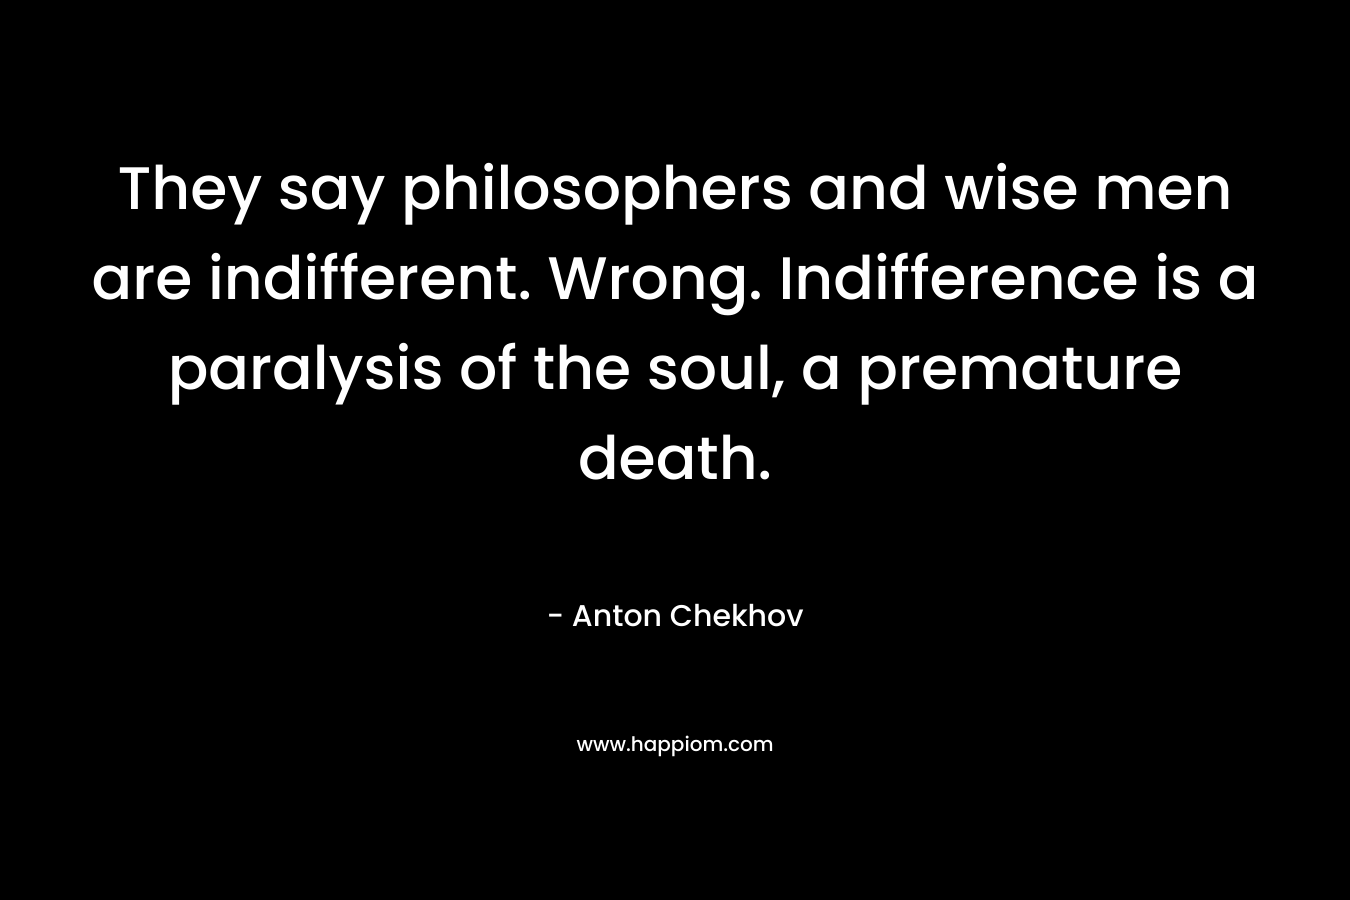 They say philosophers and wise men are indifferent. Wrong. Indifference is a paralysis of the soul, a premature death. – Anton Chekhov